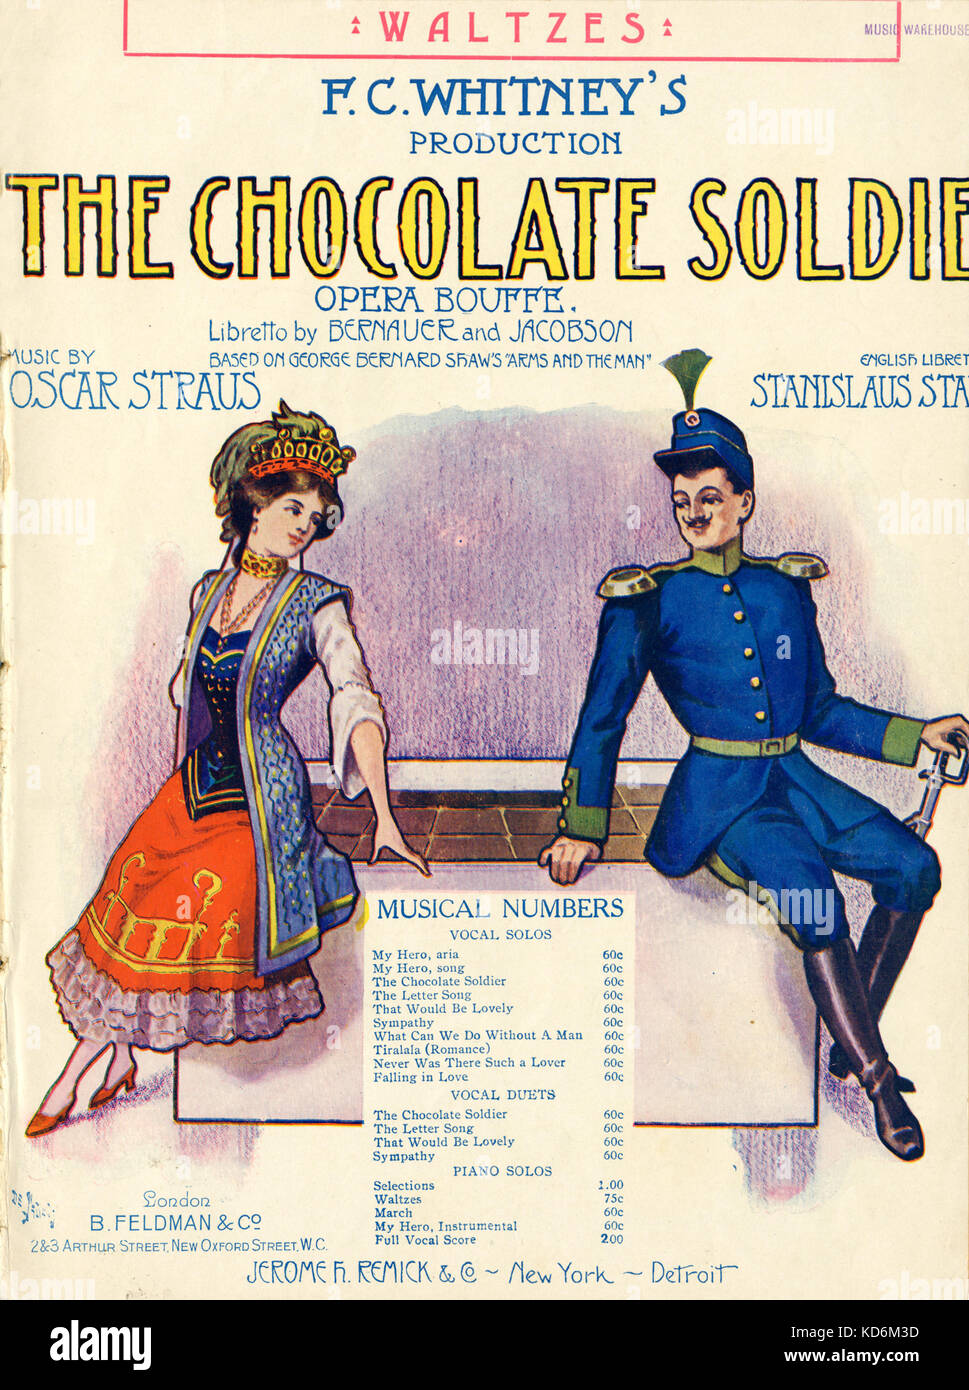 Oscar Straus  ' The Chocolate Soldier ' ( ' Der Tapfere Soldat ' ). Opera bouffe. Score cover of waltzes from operetta (arrangement for piano), 1909 (Vienna première 1908, New York 1909). Opéra Bouffe.  The heroine and the soldier.  Austrian composer, 1870-1954.  F.C. Whitney's production. Based on George Bernard Shaw ' s ' Arms and the Man '. Published B. Feldman & Co., London. 1909 Jerome H. Remick, New York - Detroit.  Orginally published 1908 Ludwig Doblinger (Bernhard Hermansky), Vienna - Leipzig. Stock Photo